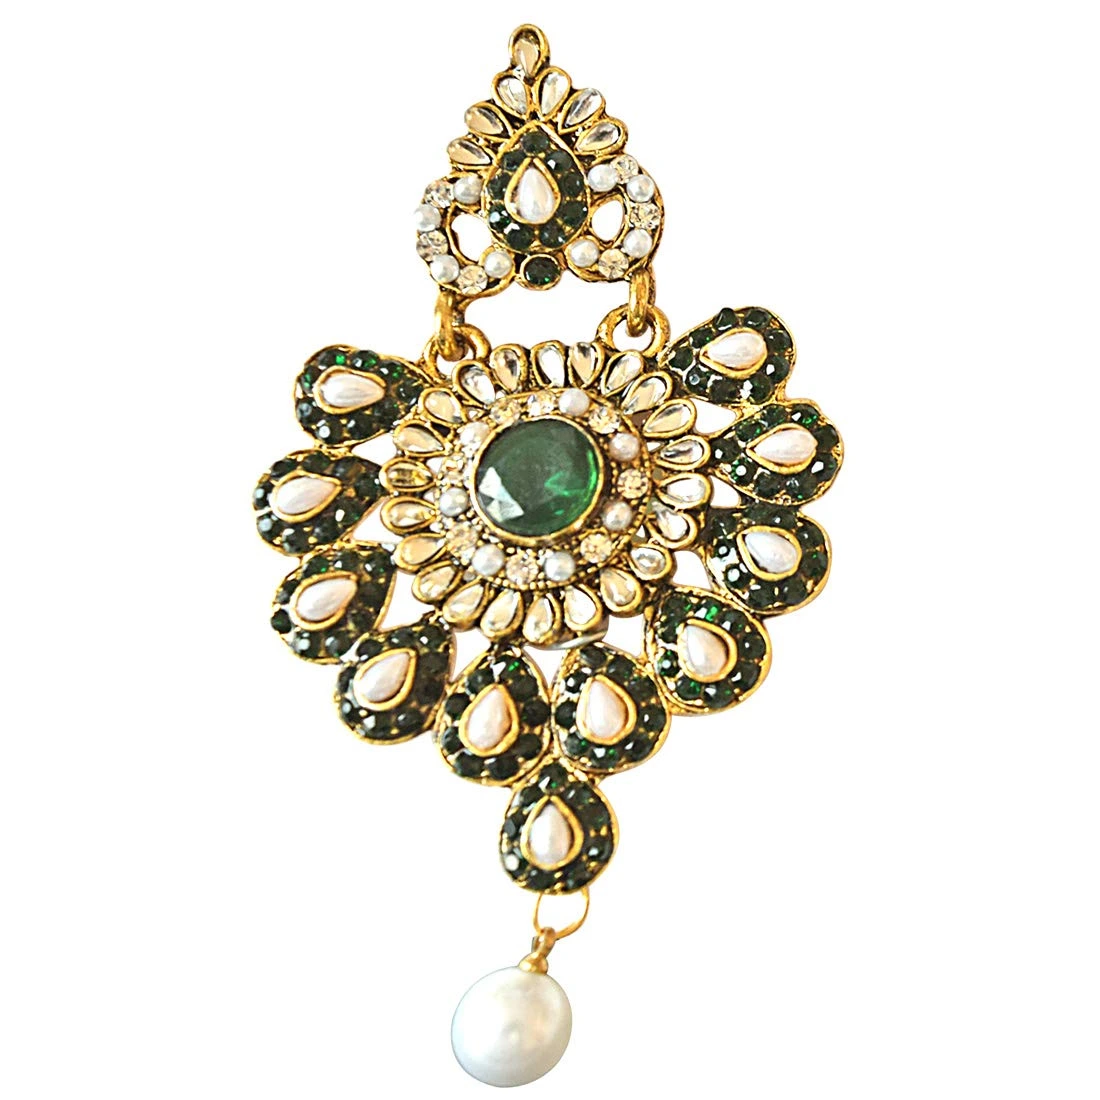 Floral Designed Green & White Stones, Shell Pearl & Gold Plated Ch Bali Earrings